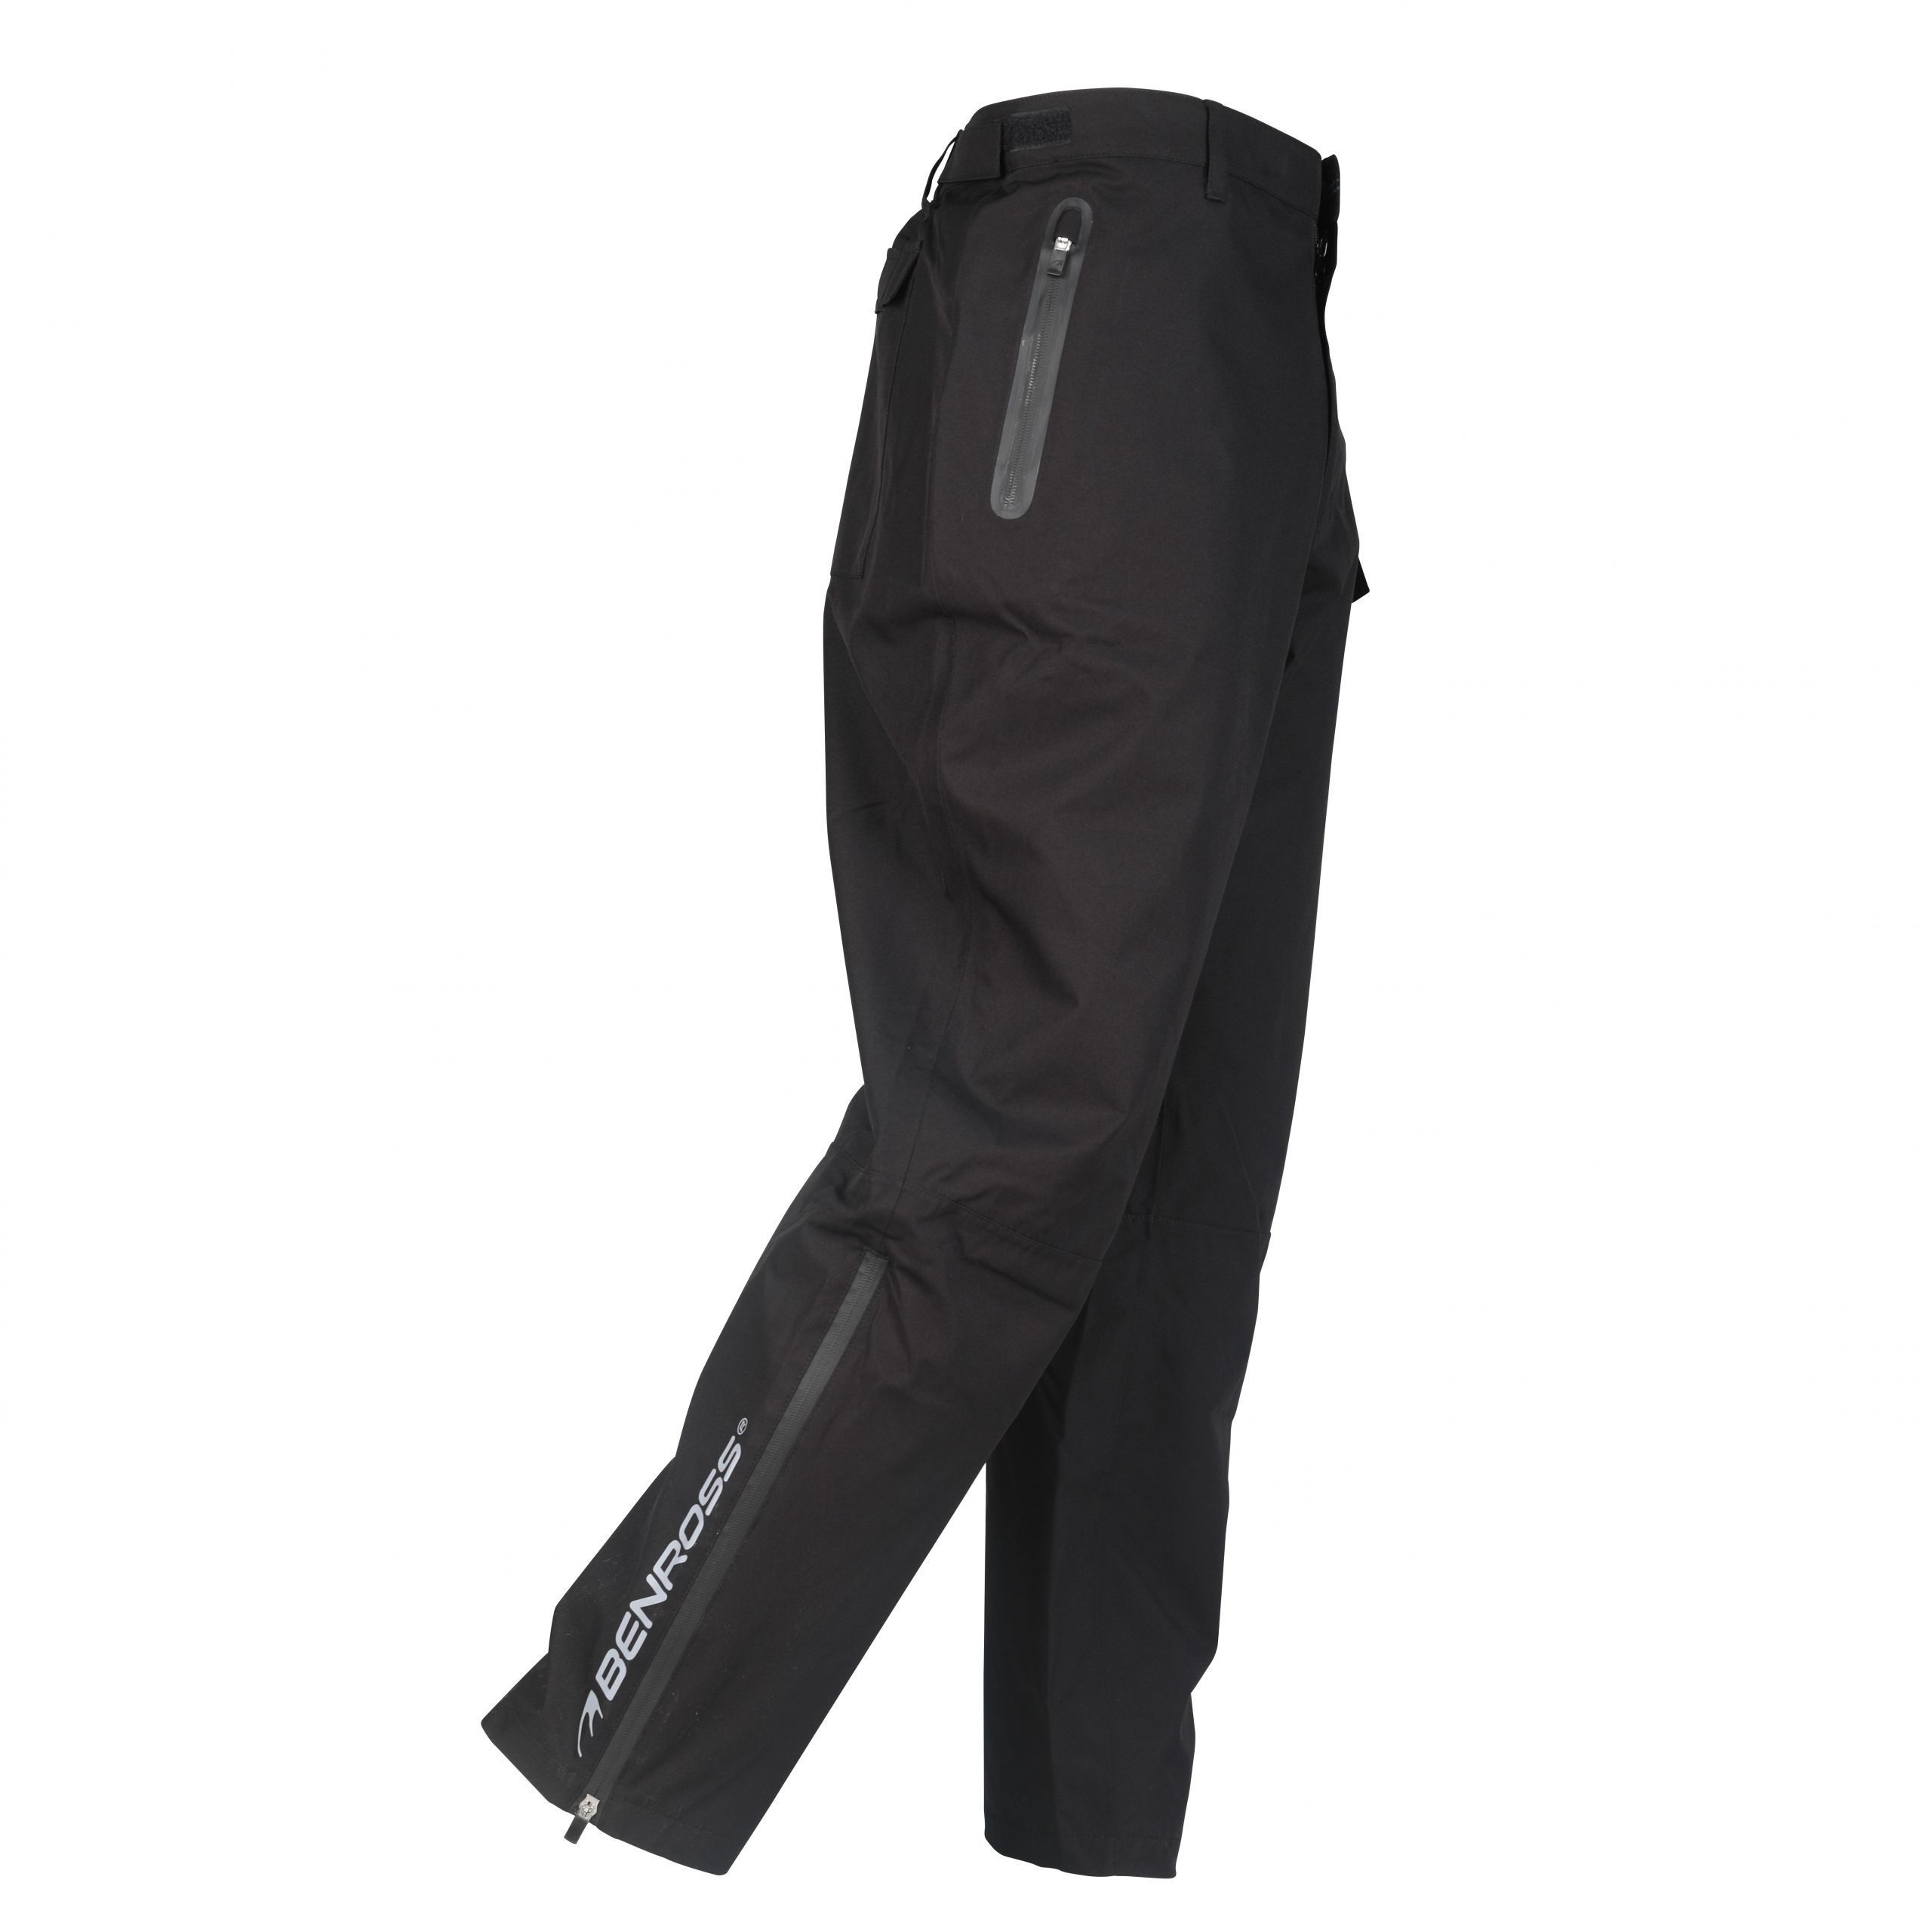 Best Waterproof Golf Trousers For Playing in The Rain